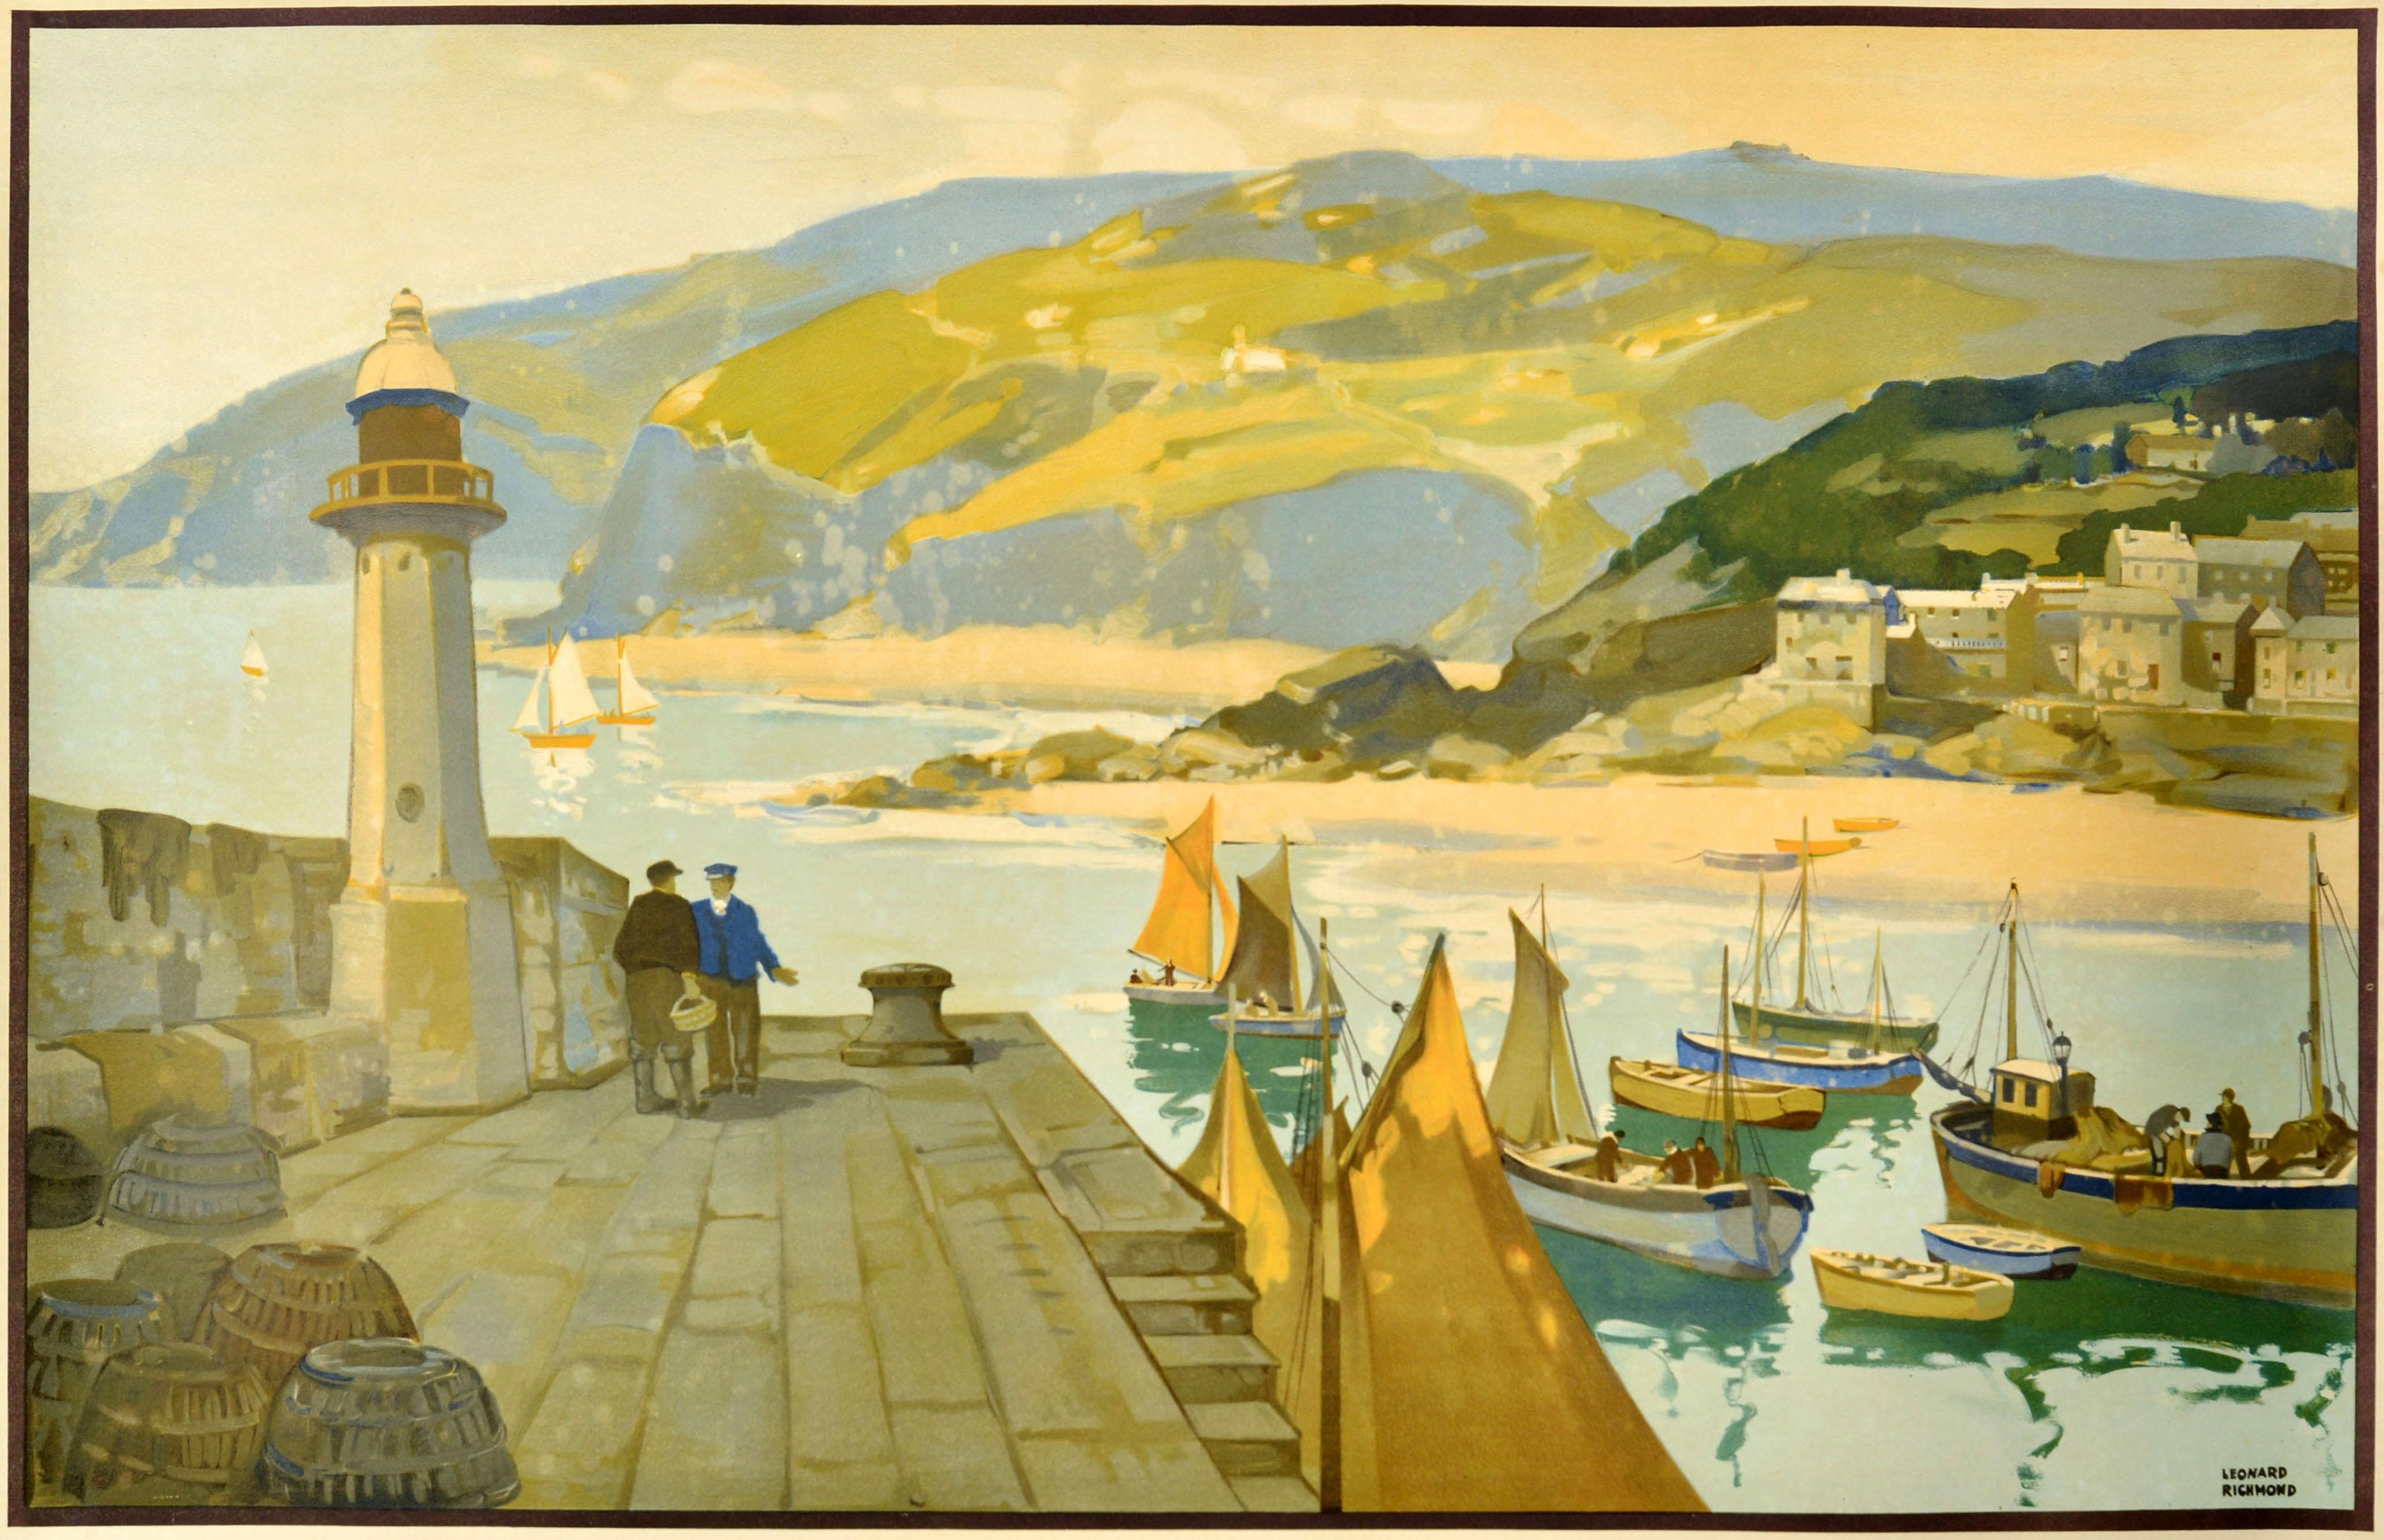 Original vintage GWR Great Western Railway poster for Cornwall featuring a scenic view of fishing boats in a Cornish harbour and men on the pier by a lighthouse with fishing nets in the foreground, a village above a sandy beach on the other side and